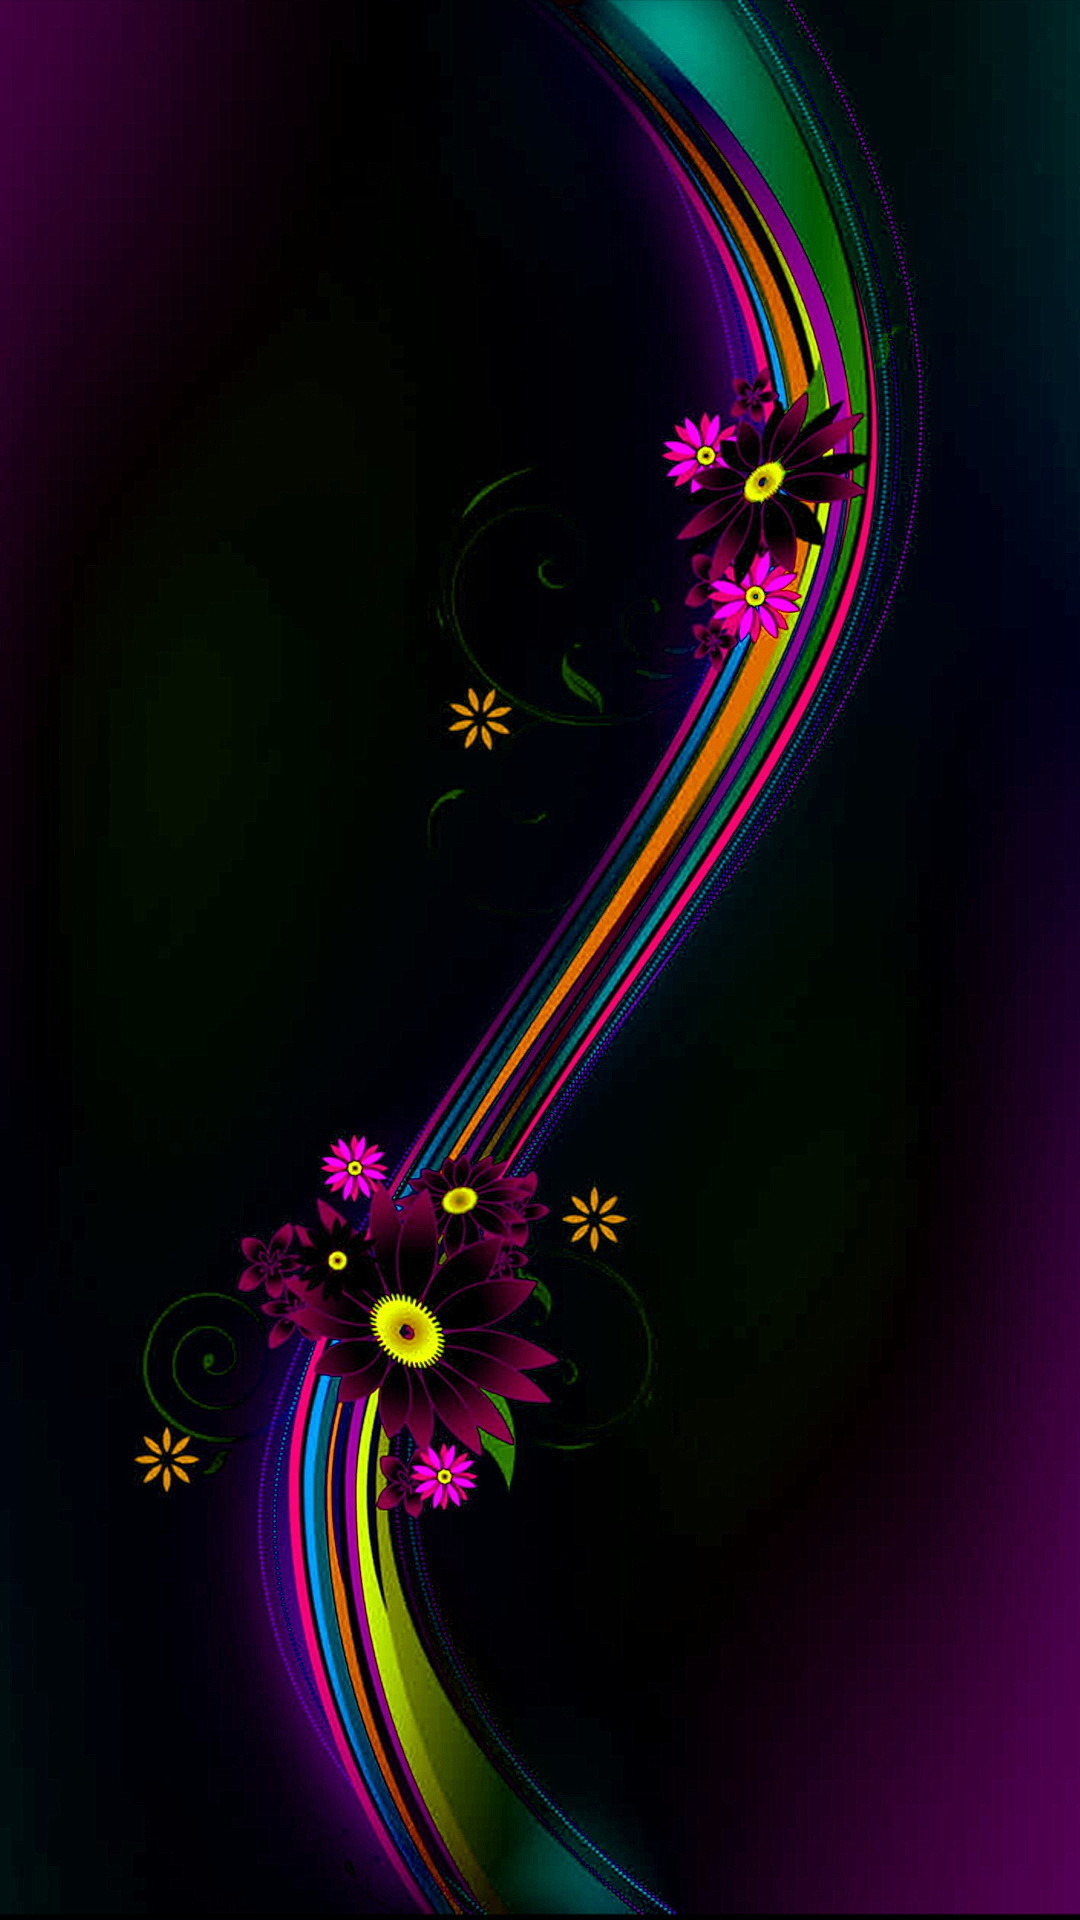 1080x1920 Black flower - Tap to see more flowery colorful patterened abstract  wallpapers! - @mobile9